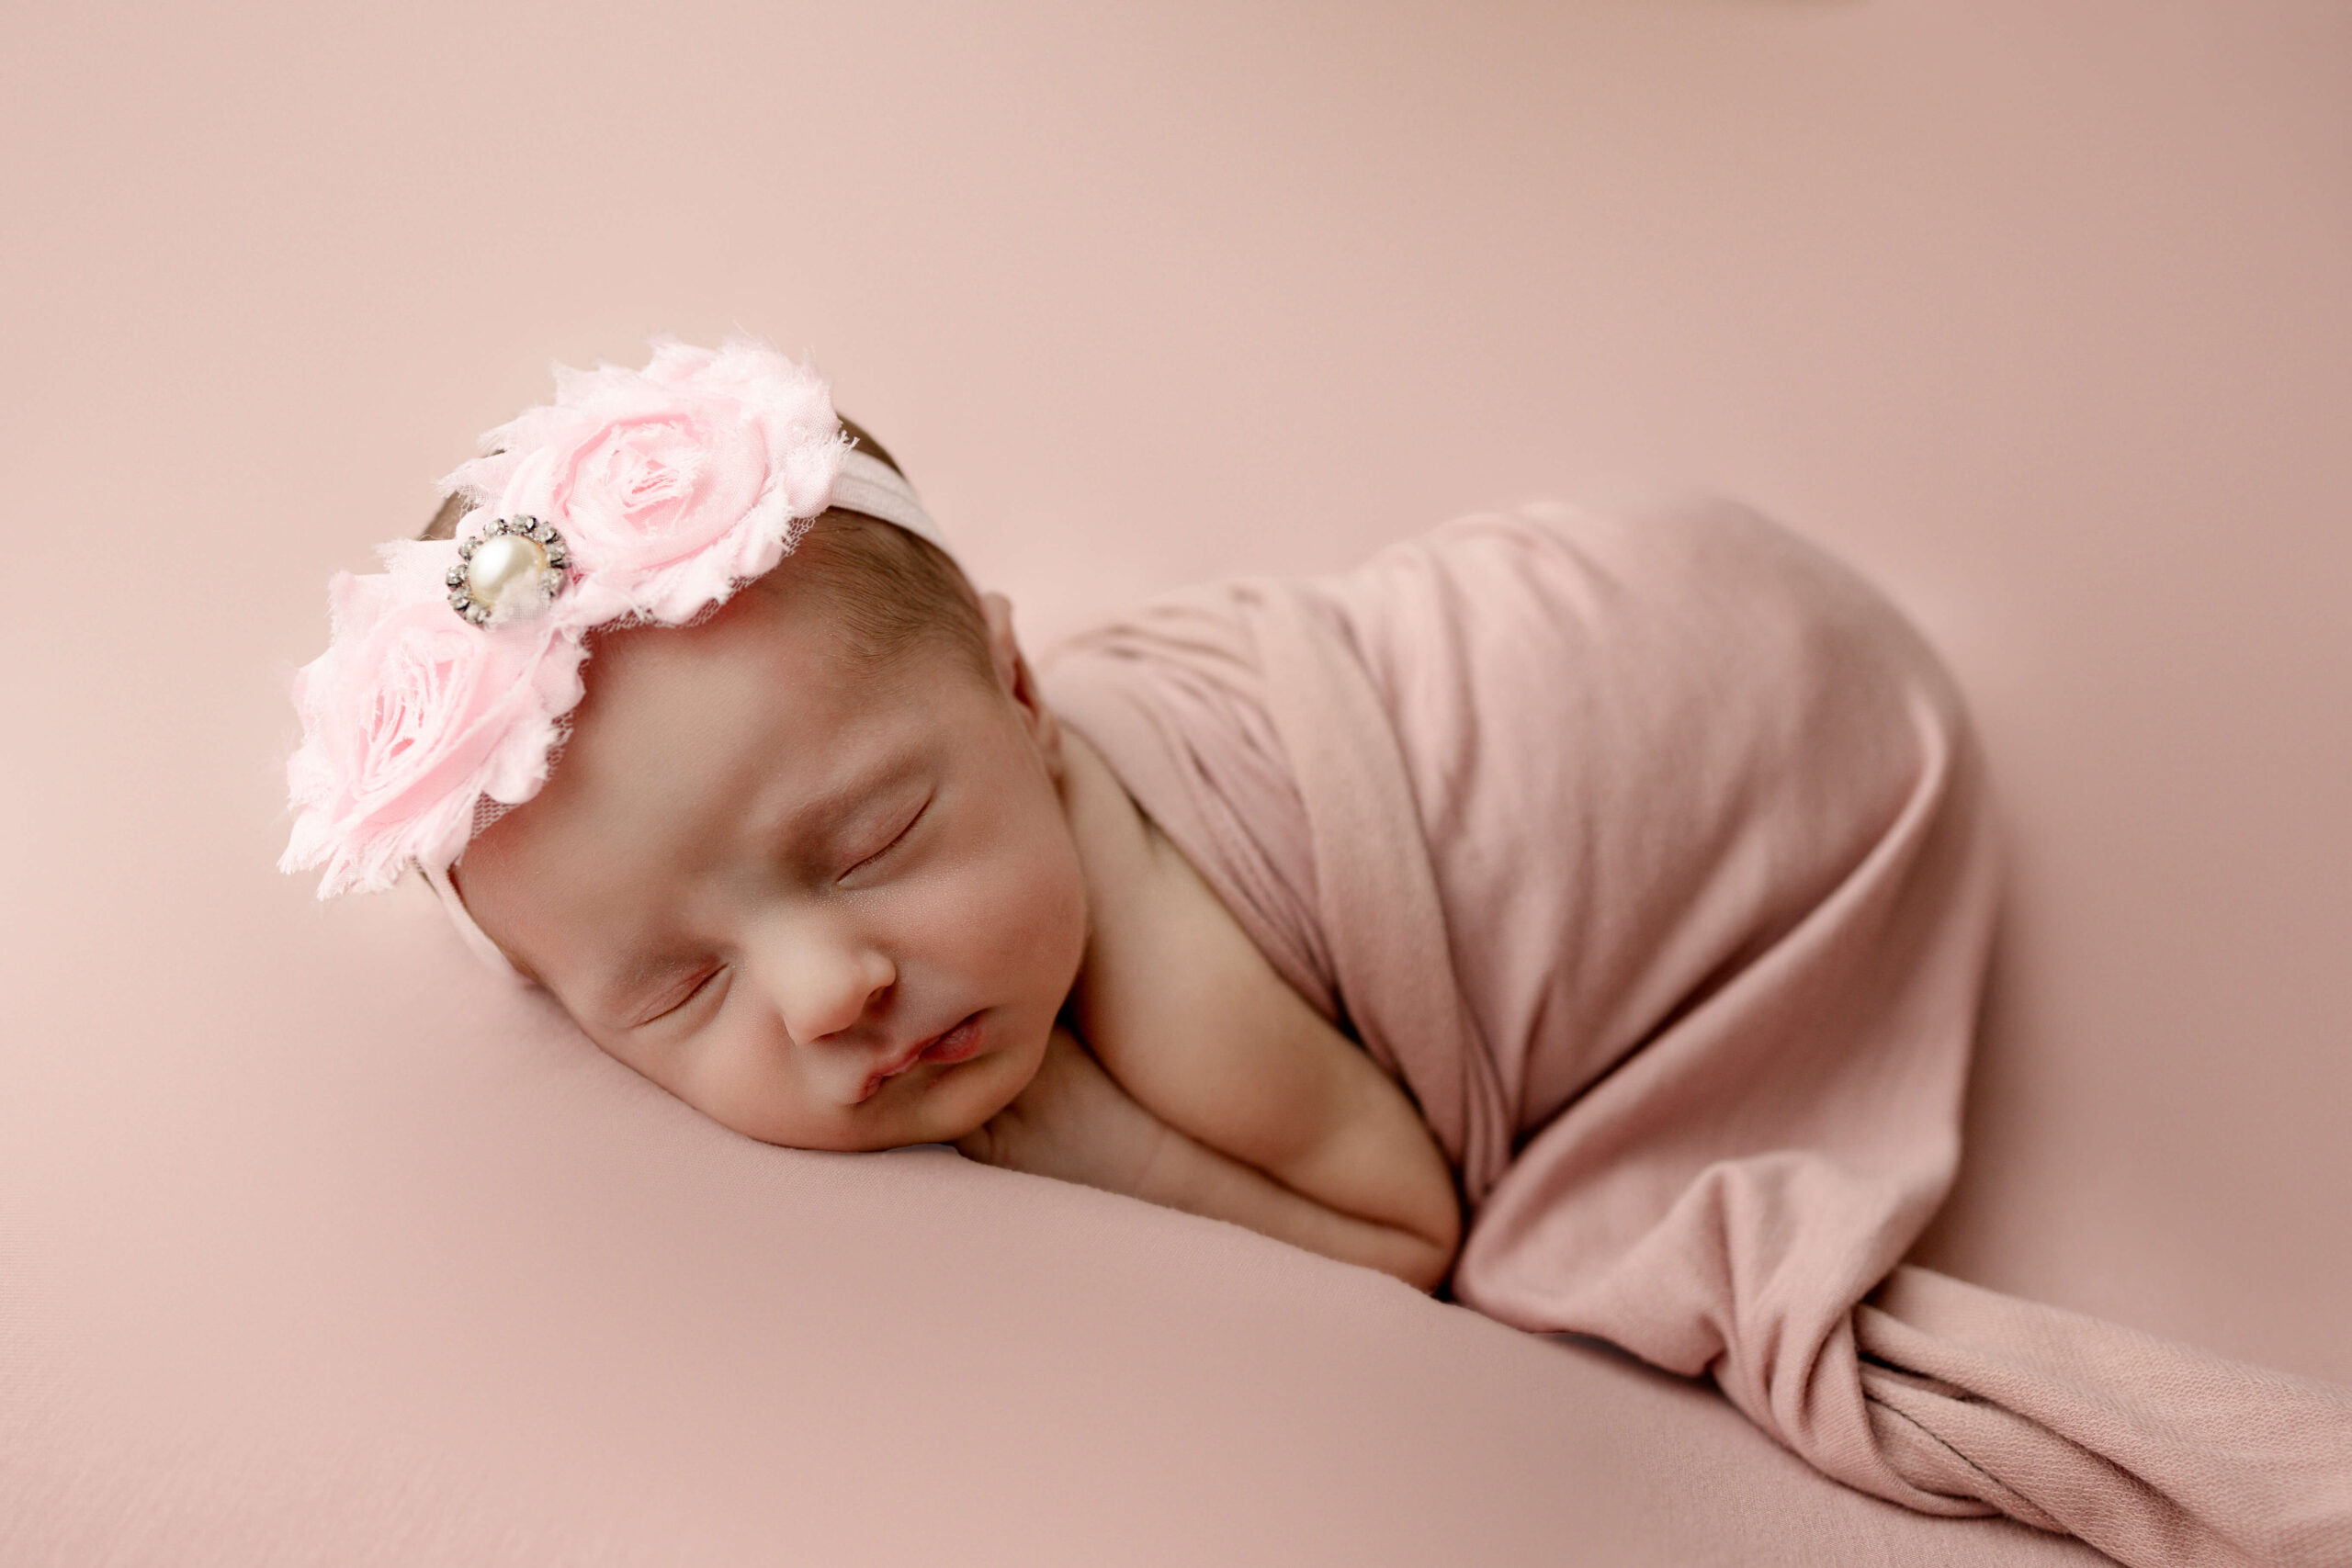 Baby wrapped on bean bag sleeping with a flower headband.